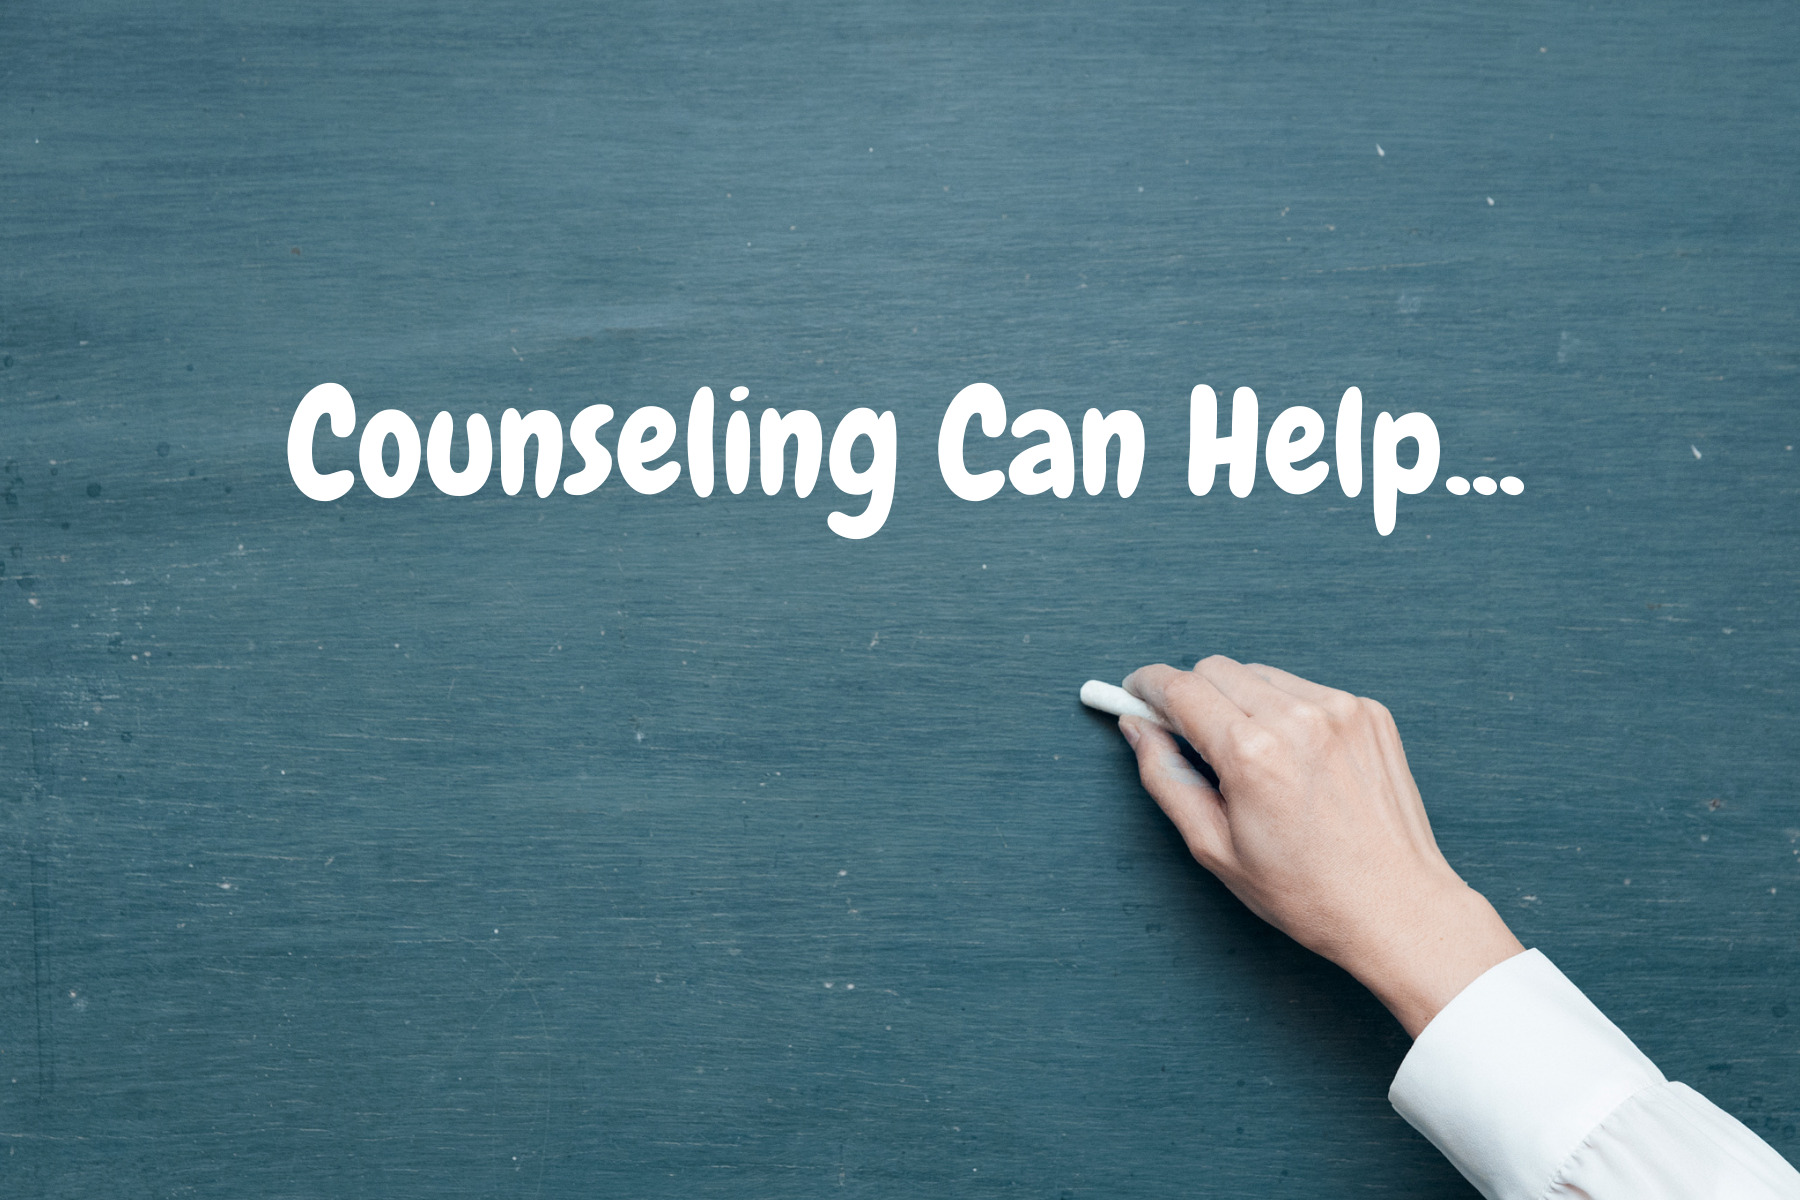 Counseling for people learn how to feel better, overcome emotional challenges, and live their best life. Santos Counseling offers counseling in office, located in the Greensboro North Carolina office as well as online counseling to anyone in the state of North Carolina.